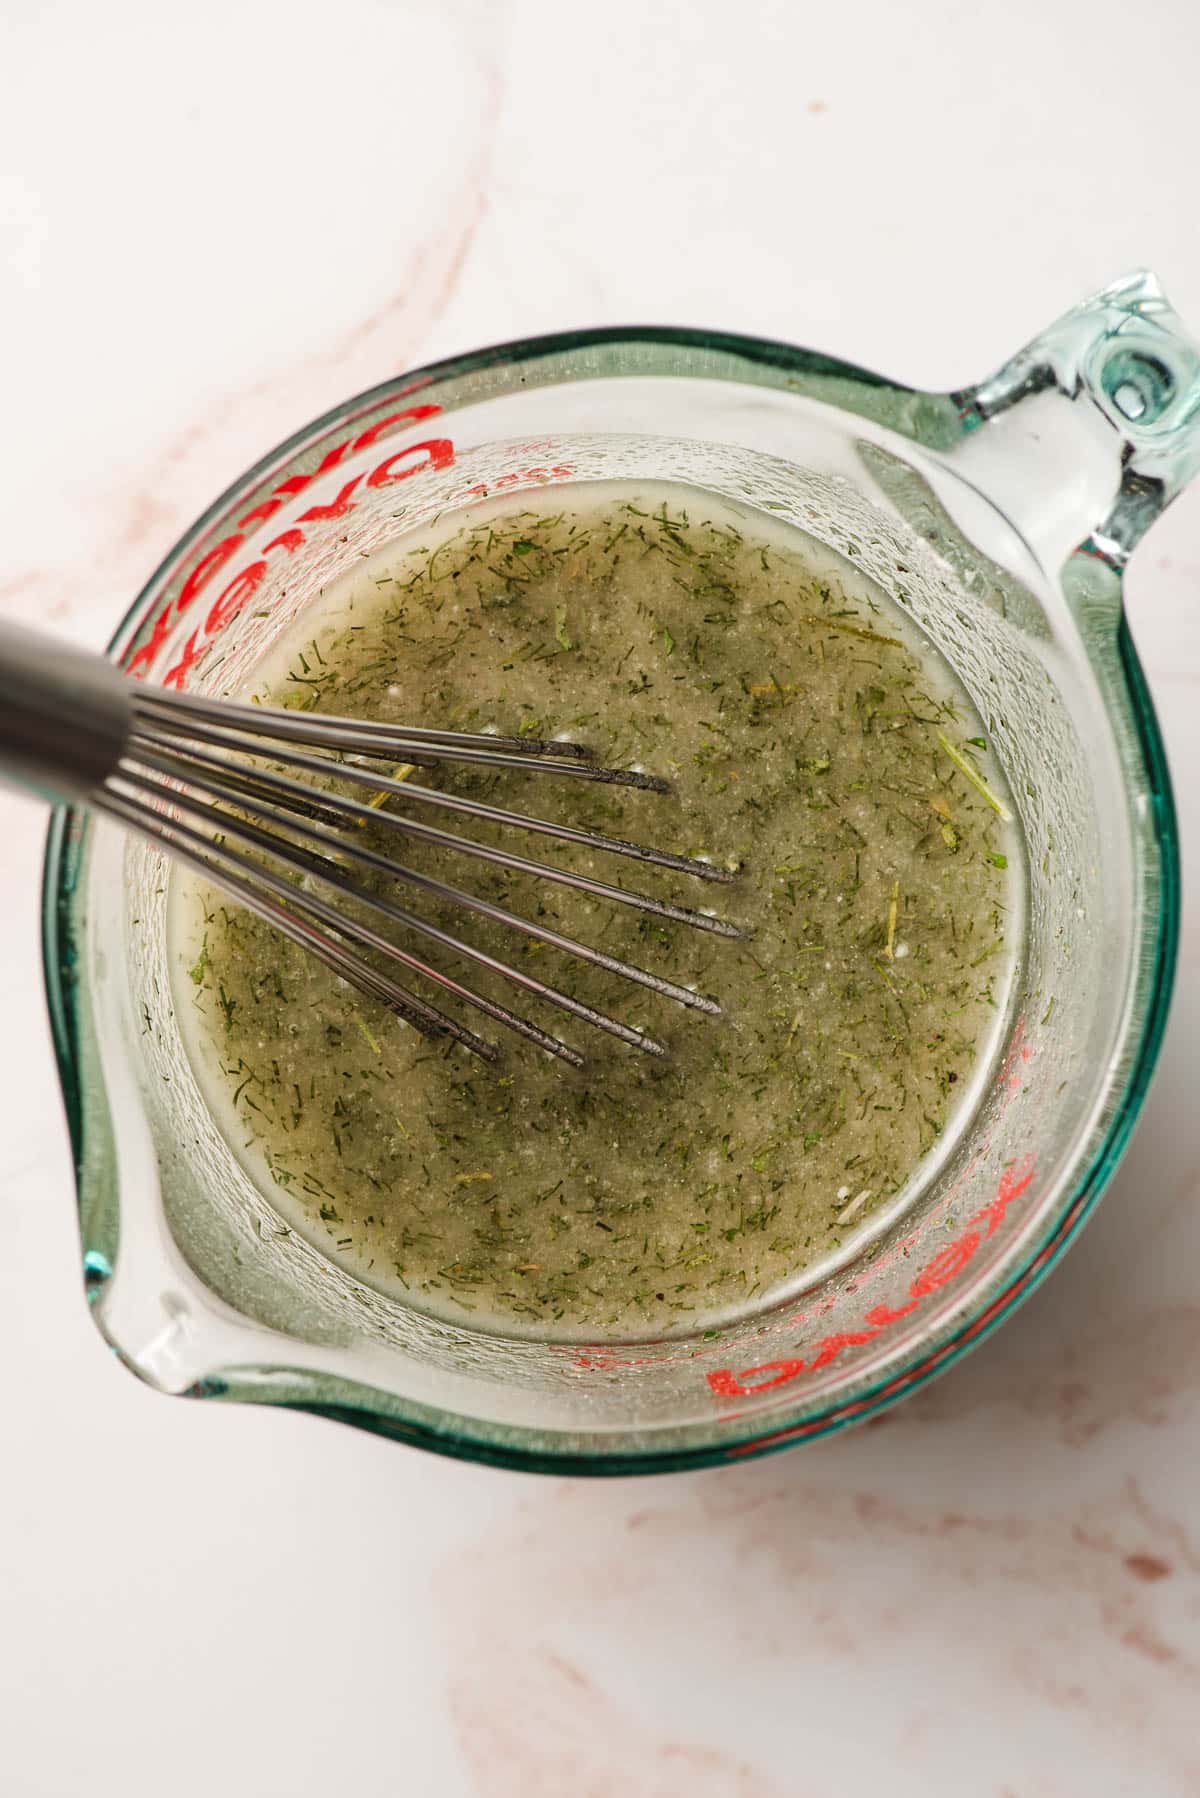 A ranch seasoning and oil mixture stuff whisked together in a glass measuring cup.